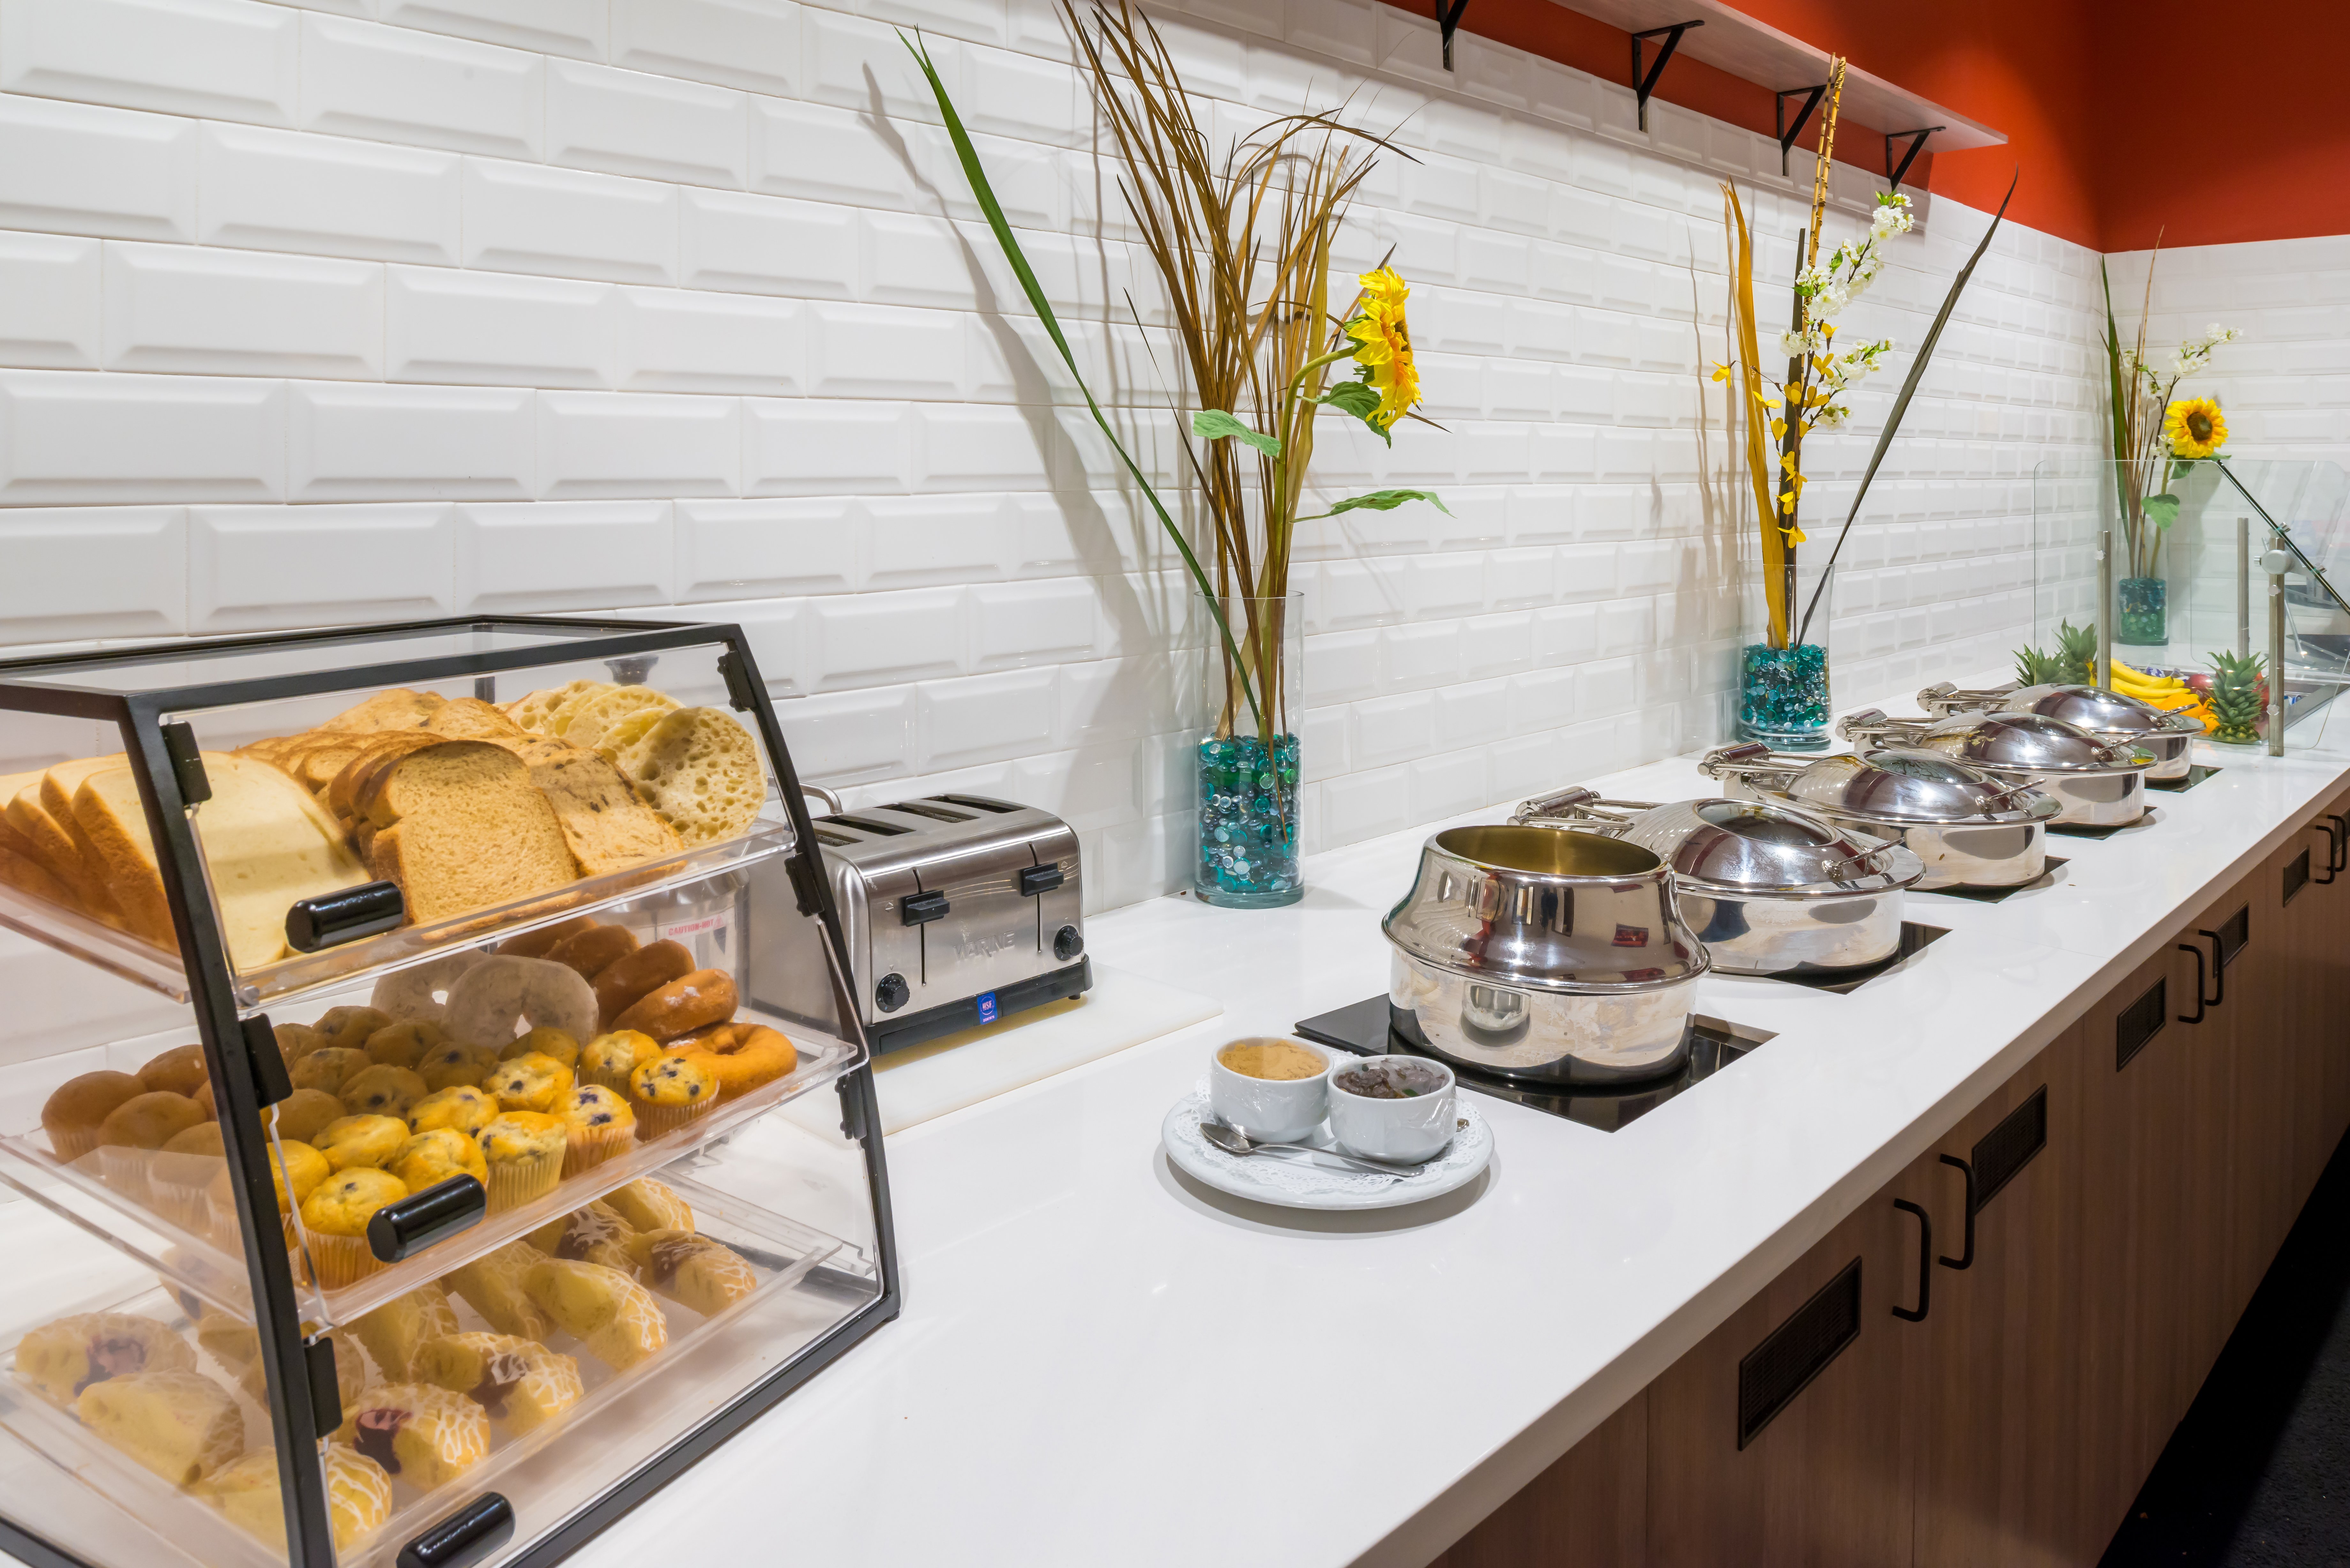 Pastries and hot food items served for breakfast.